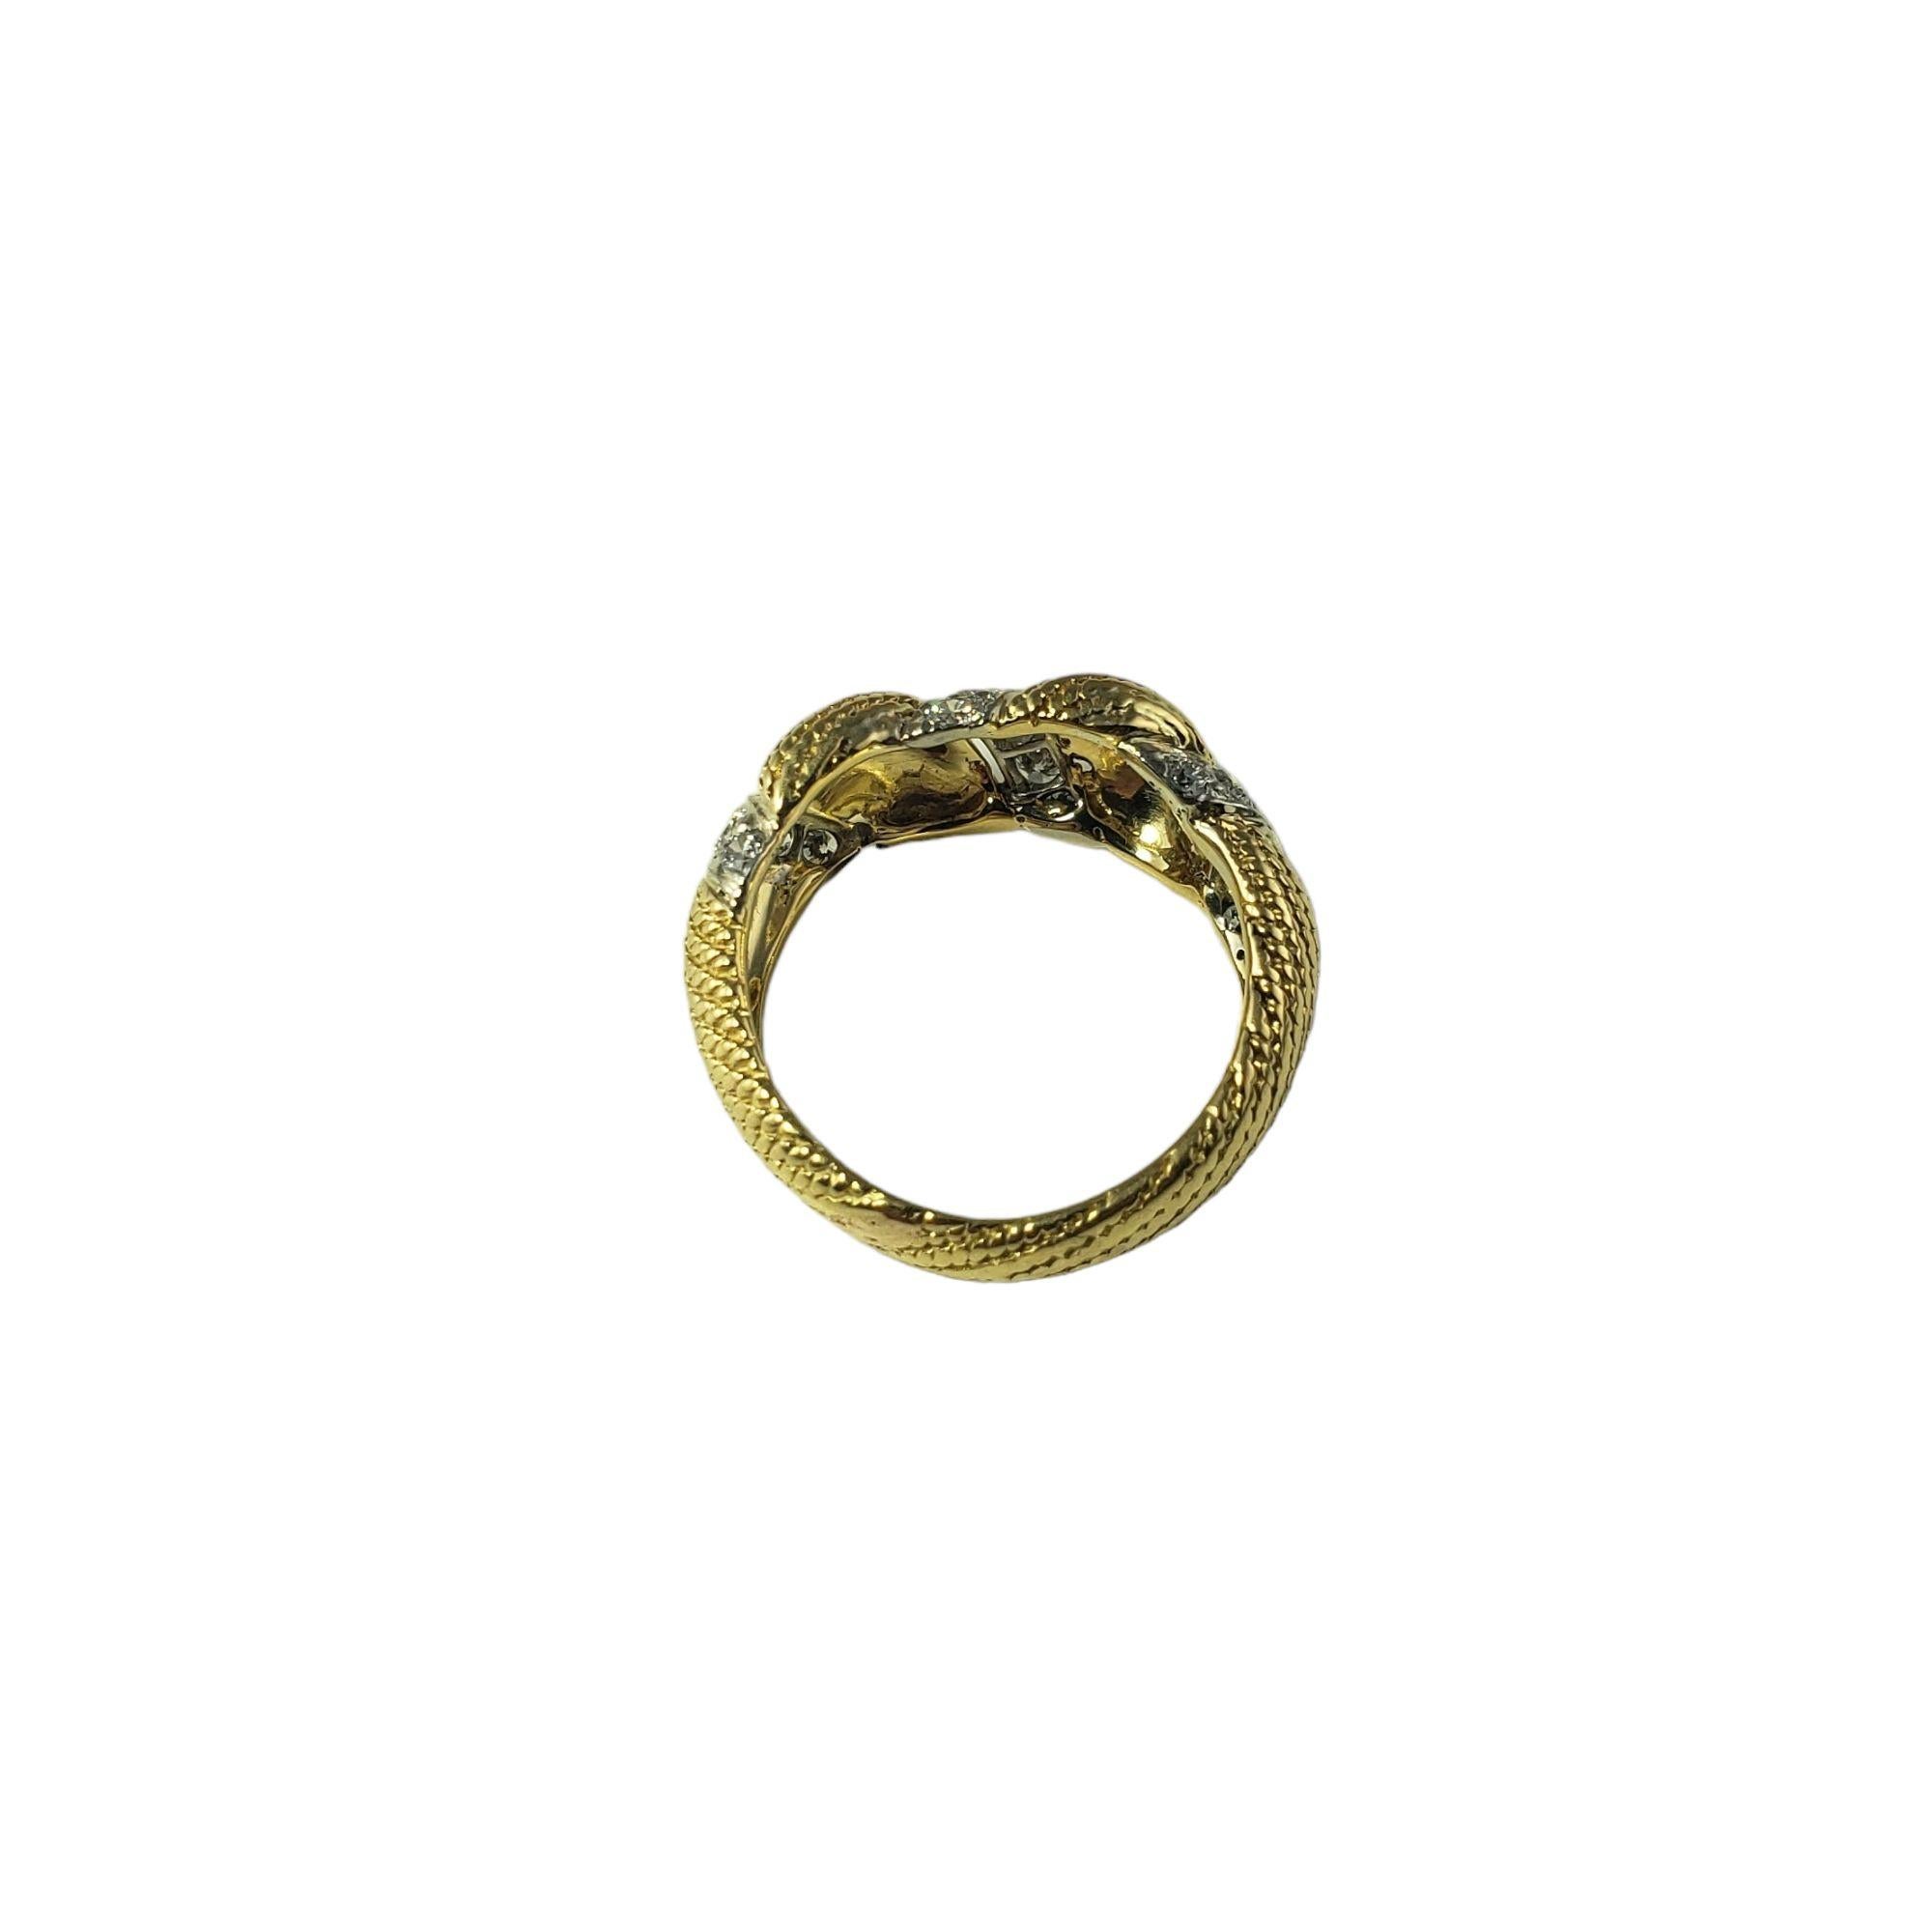 Vintage David Webb 18 Karat Yellow Gold and Diamond Ring Size 5.5-

This stunning ring by David Webb is crafted in beautifully detailed 18K yellow gold and features 15 round brilliant cut diamonds.
Width: 9 mm. Shank: 3 mm.

Approximate total